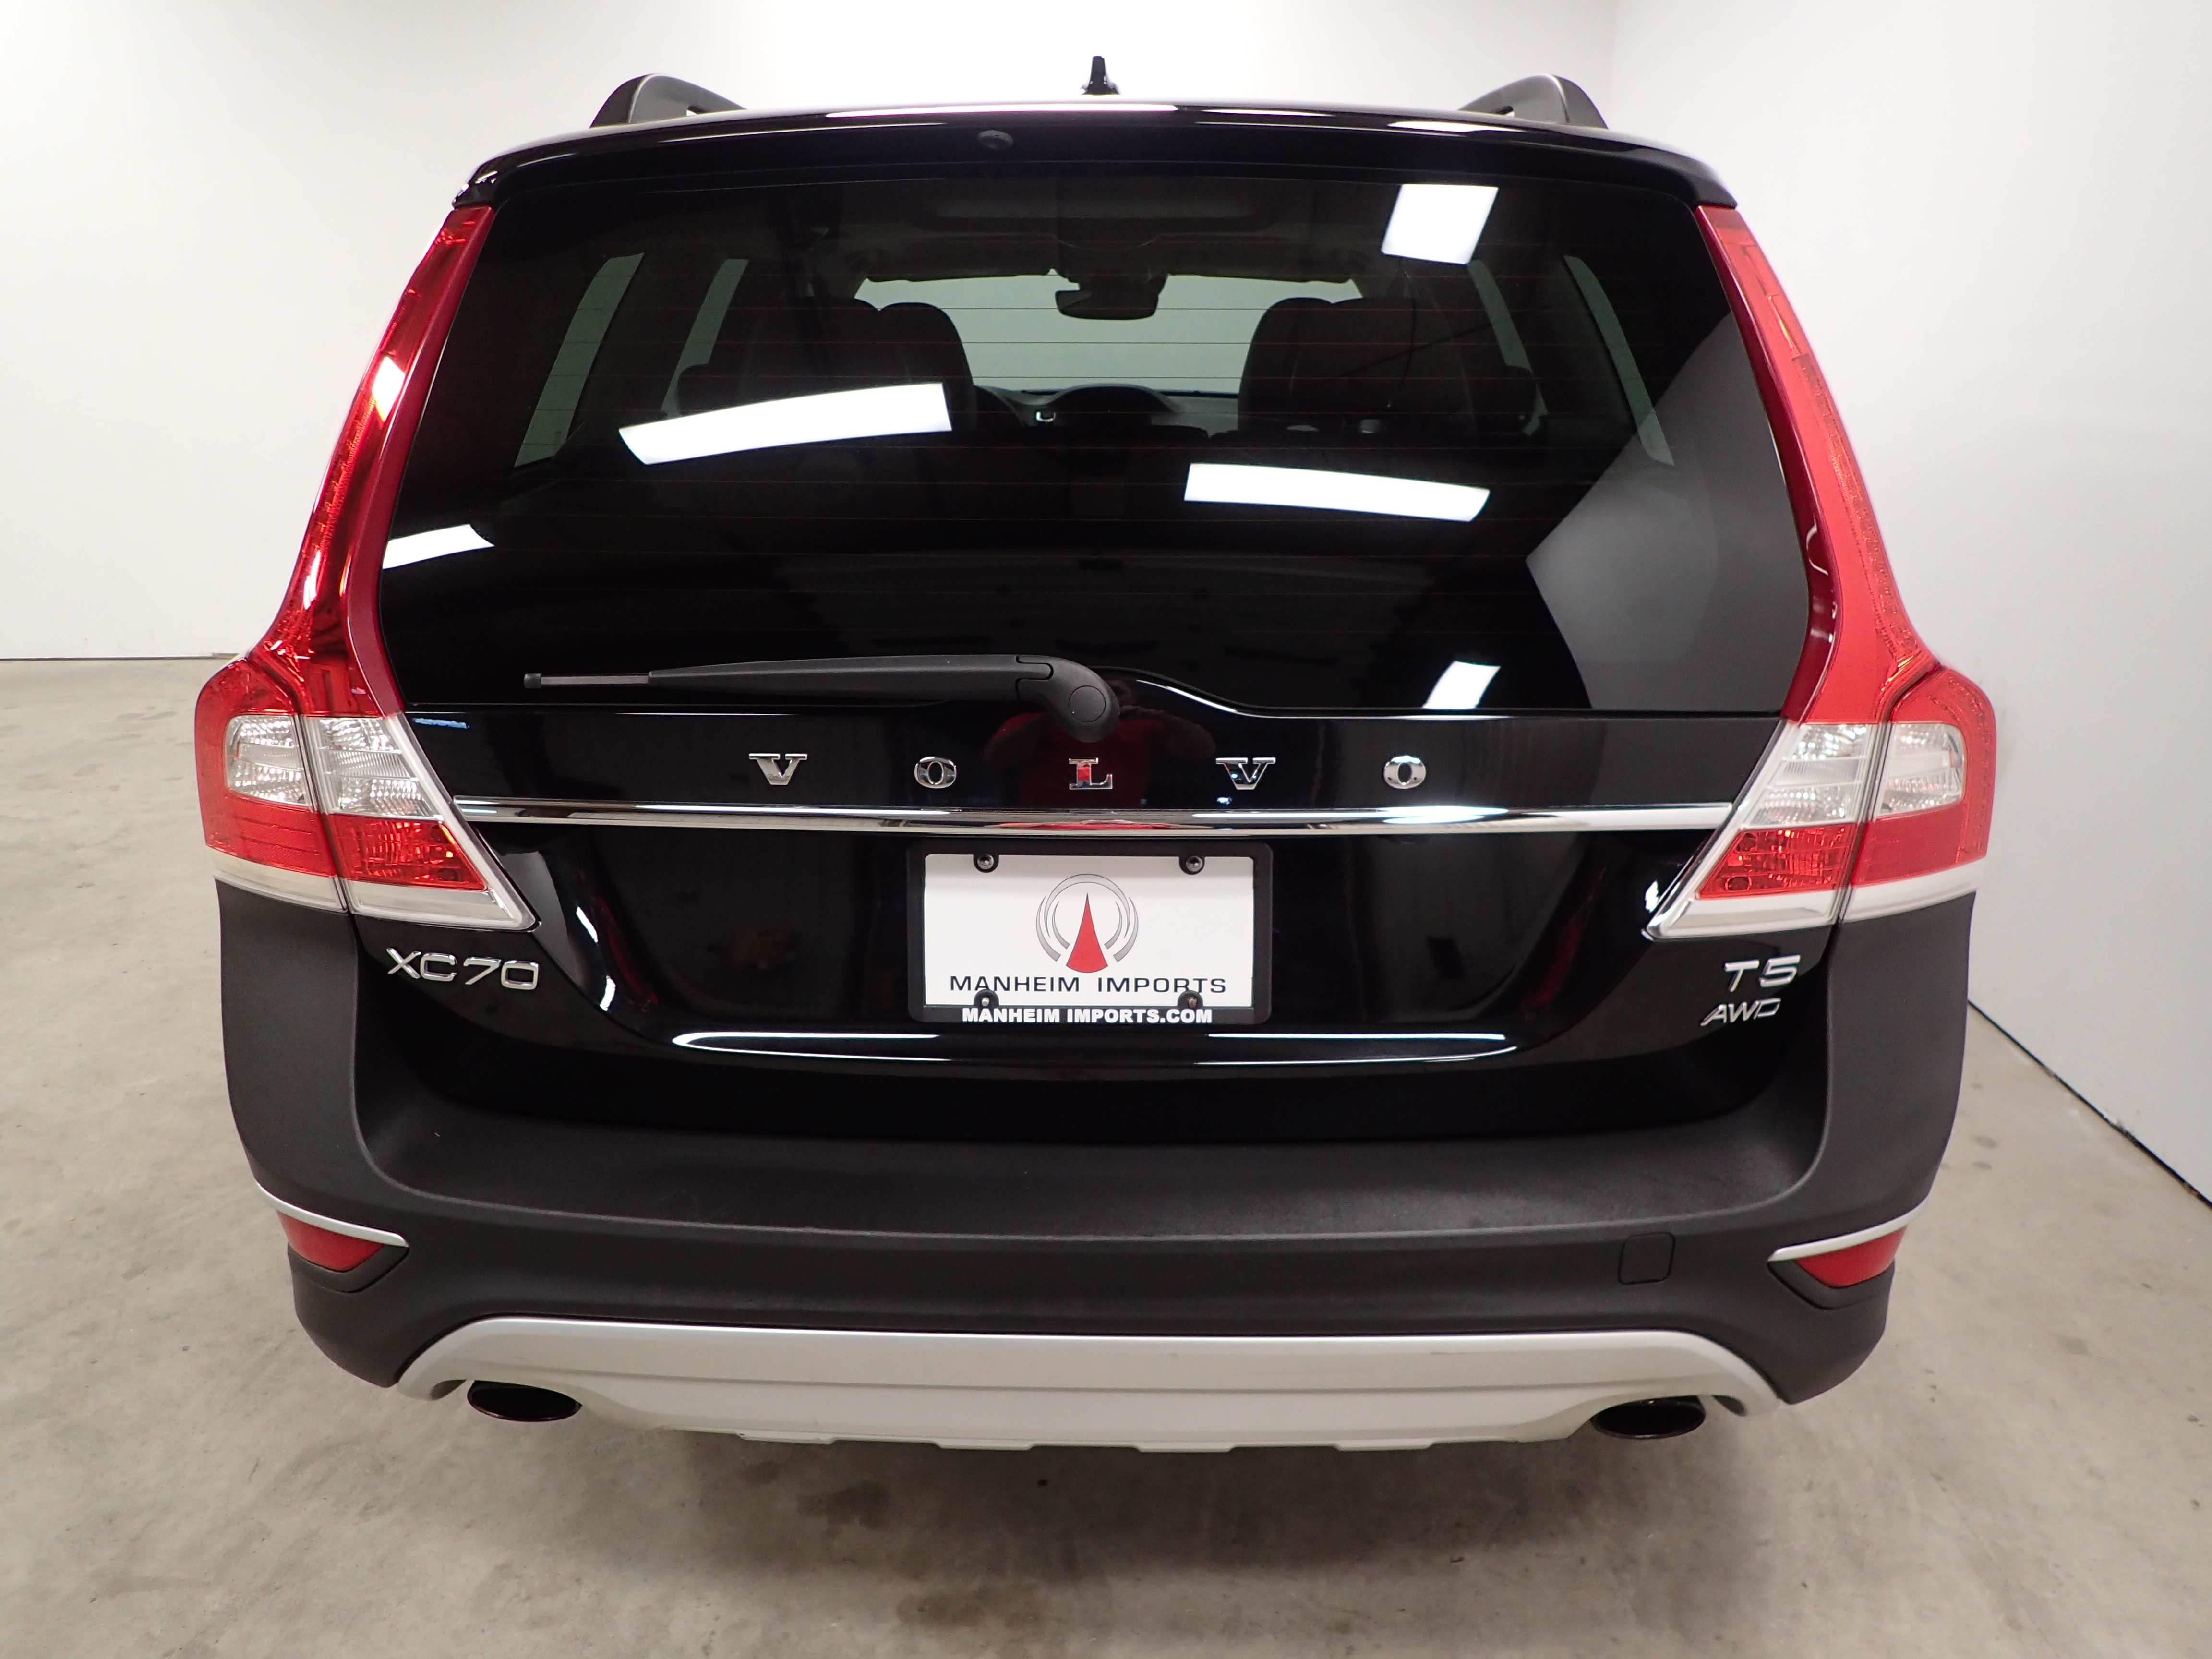 PreOwned 2016 Volvo XC70 T5 Premier Station Wagon in